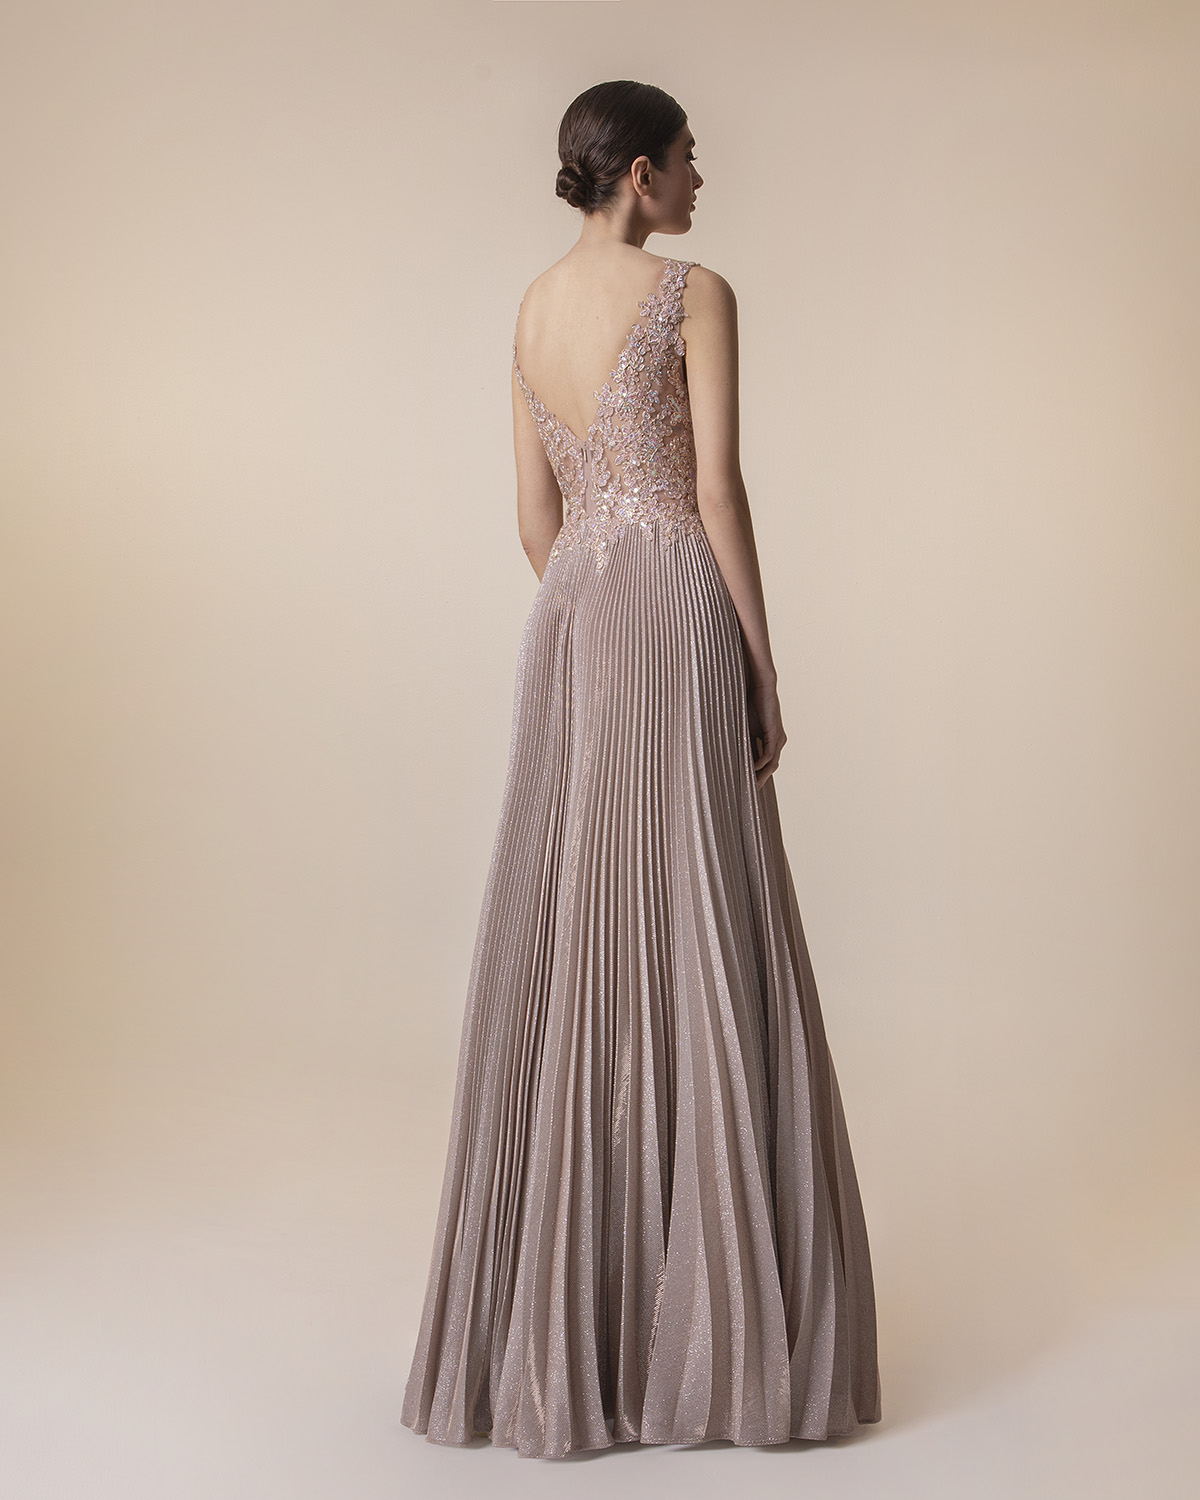 Вечерние платья / Long pleated dress with shining fabric, applique beaded lace on the top